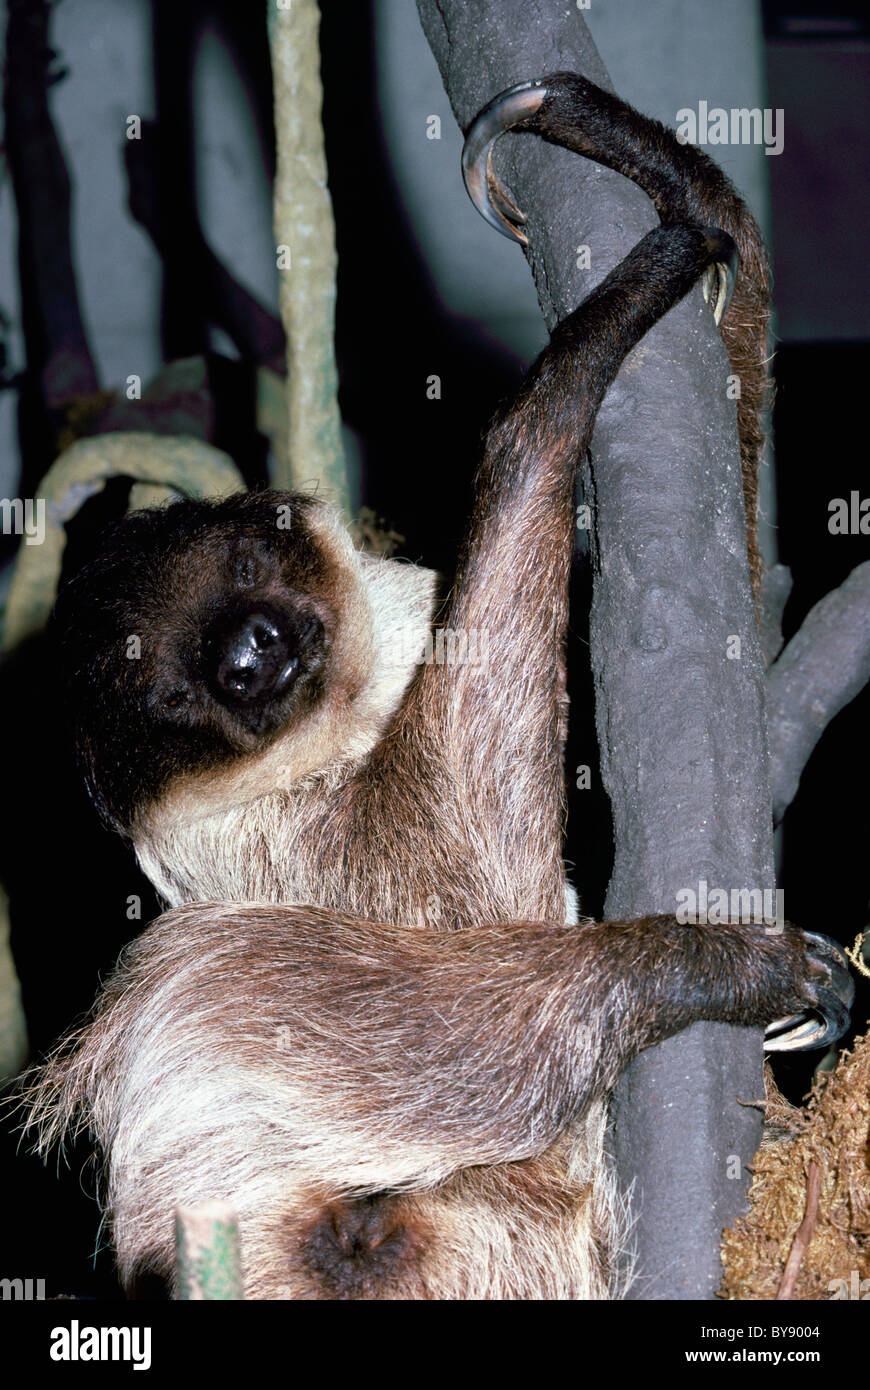 Two-Toed Sloth (Choloepus didactylus) Banque D'Images